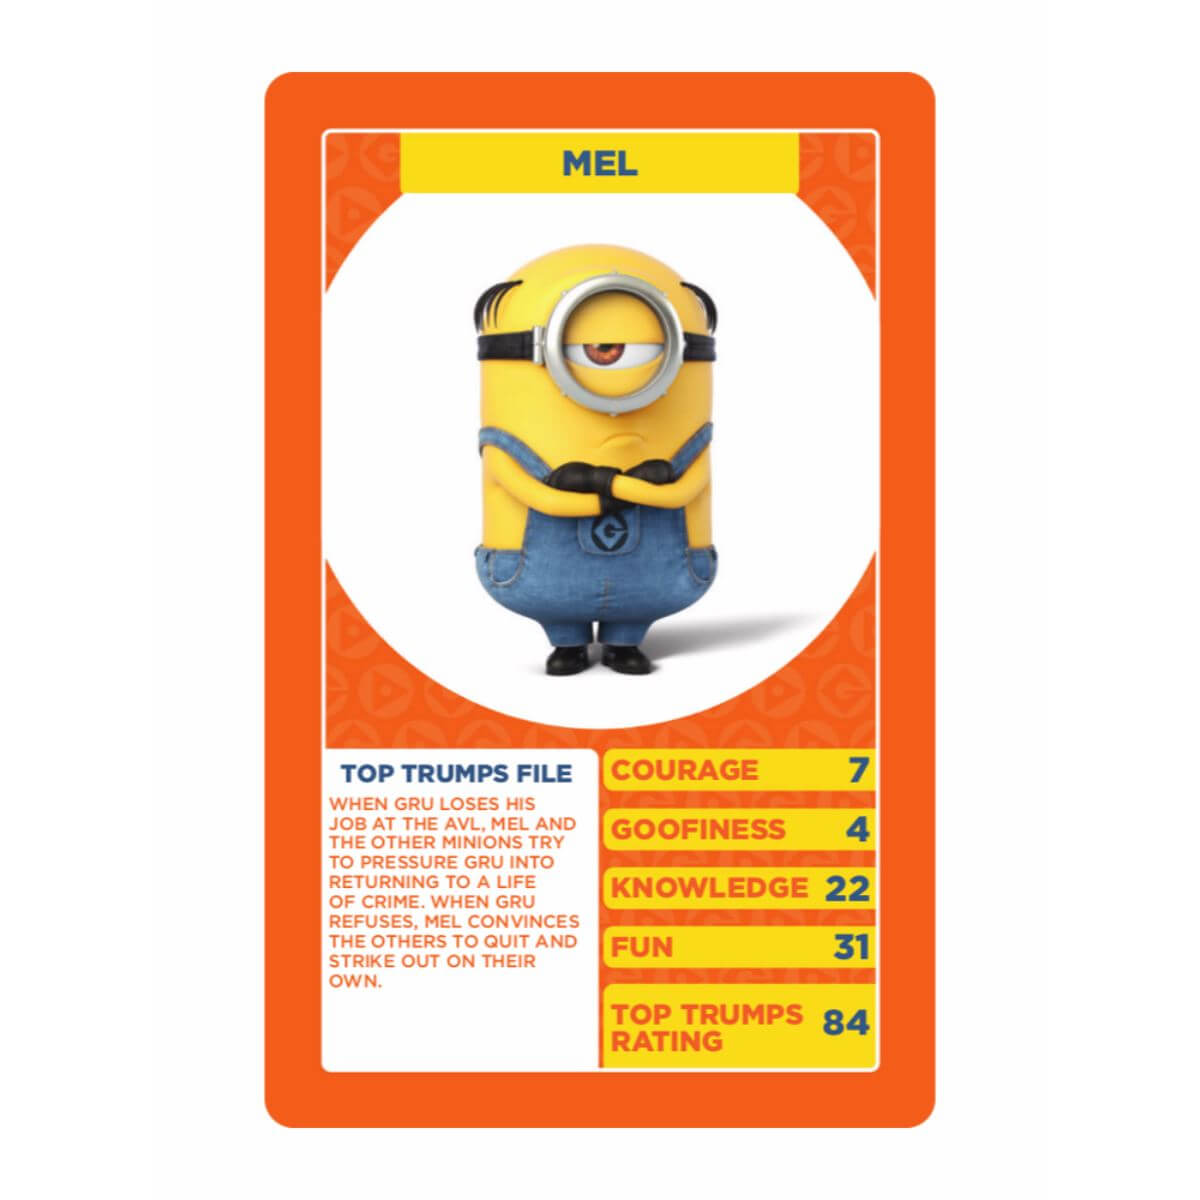 Details About Despicable Me 3 Top Trumps Card Game For Top Trump Card Template